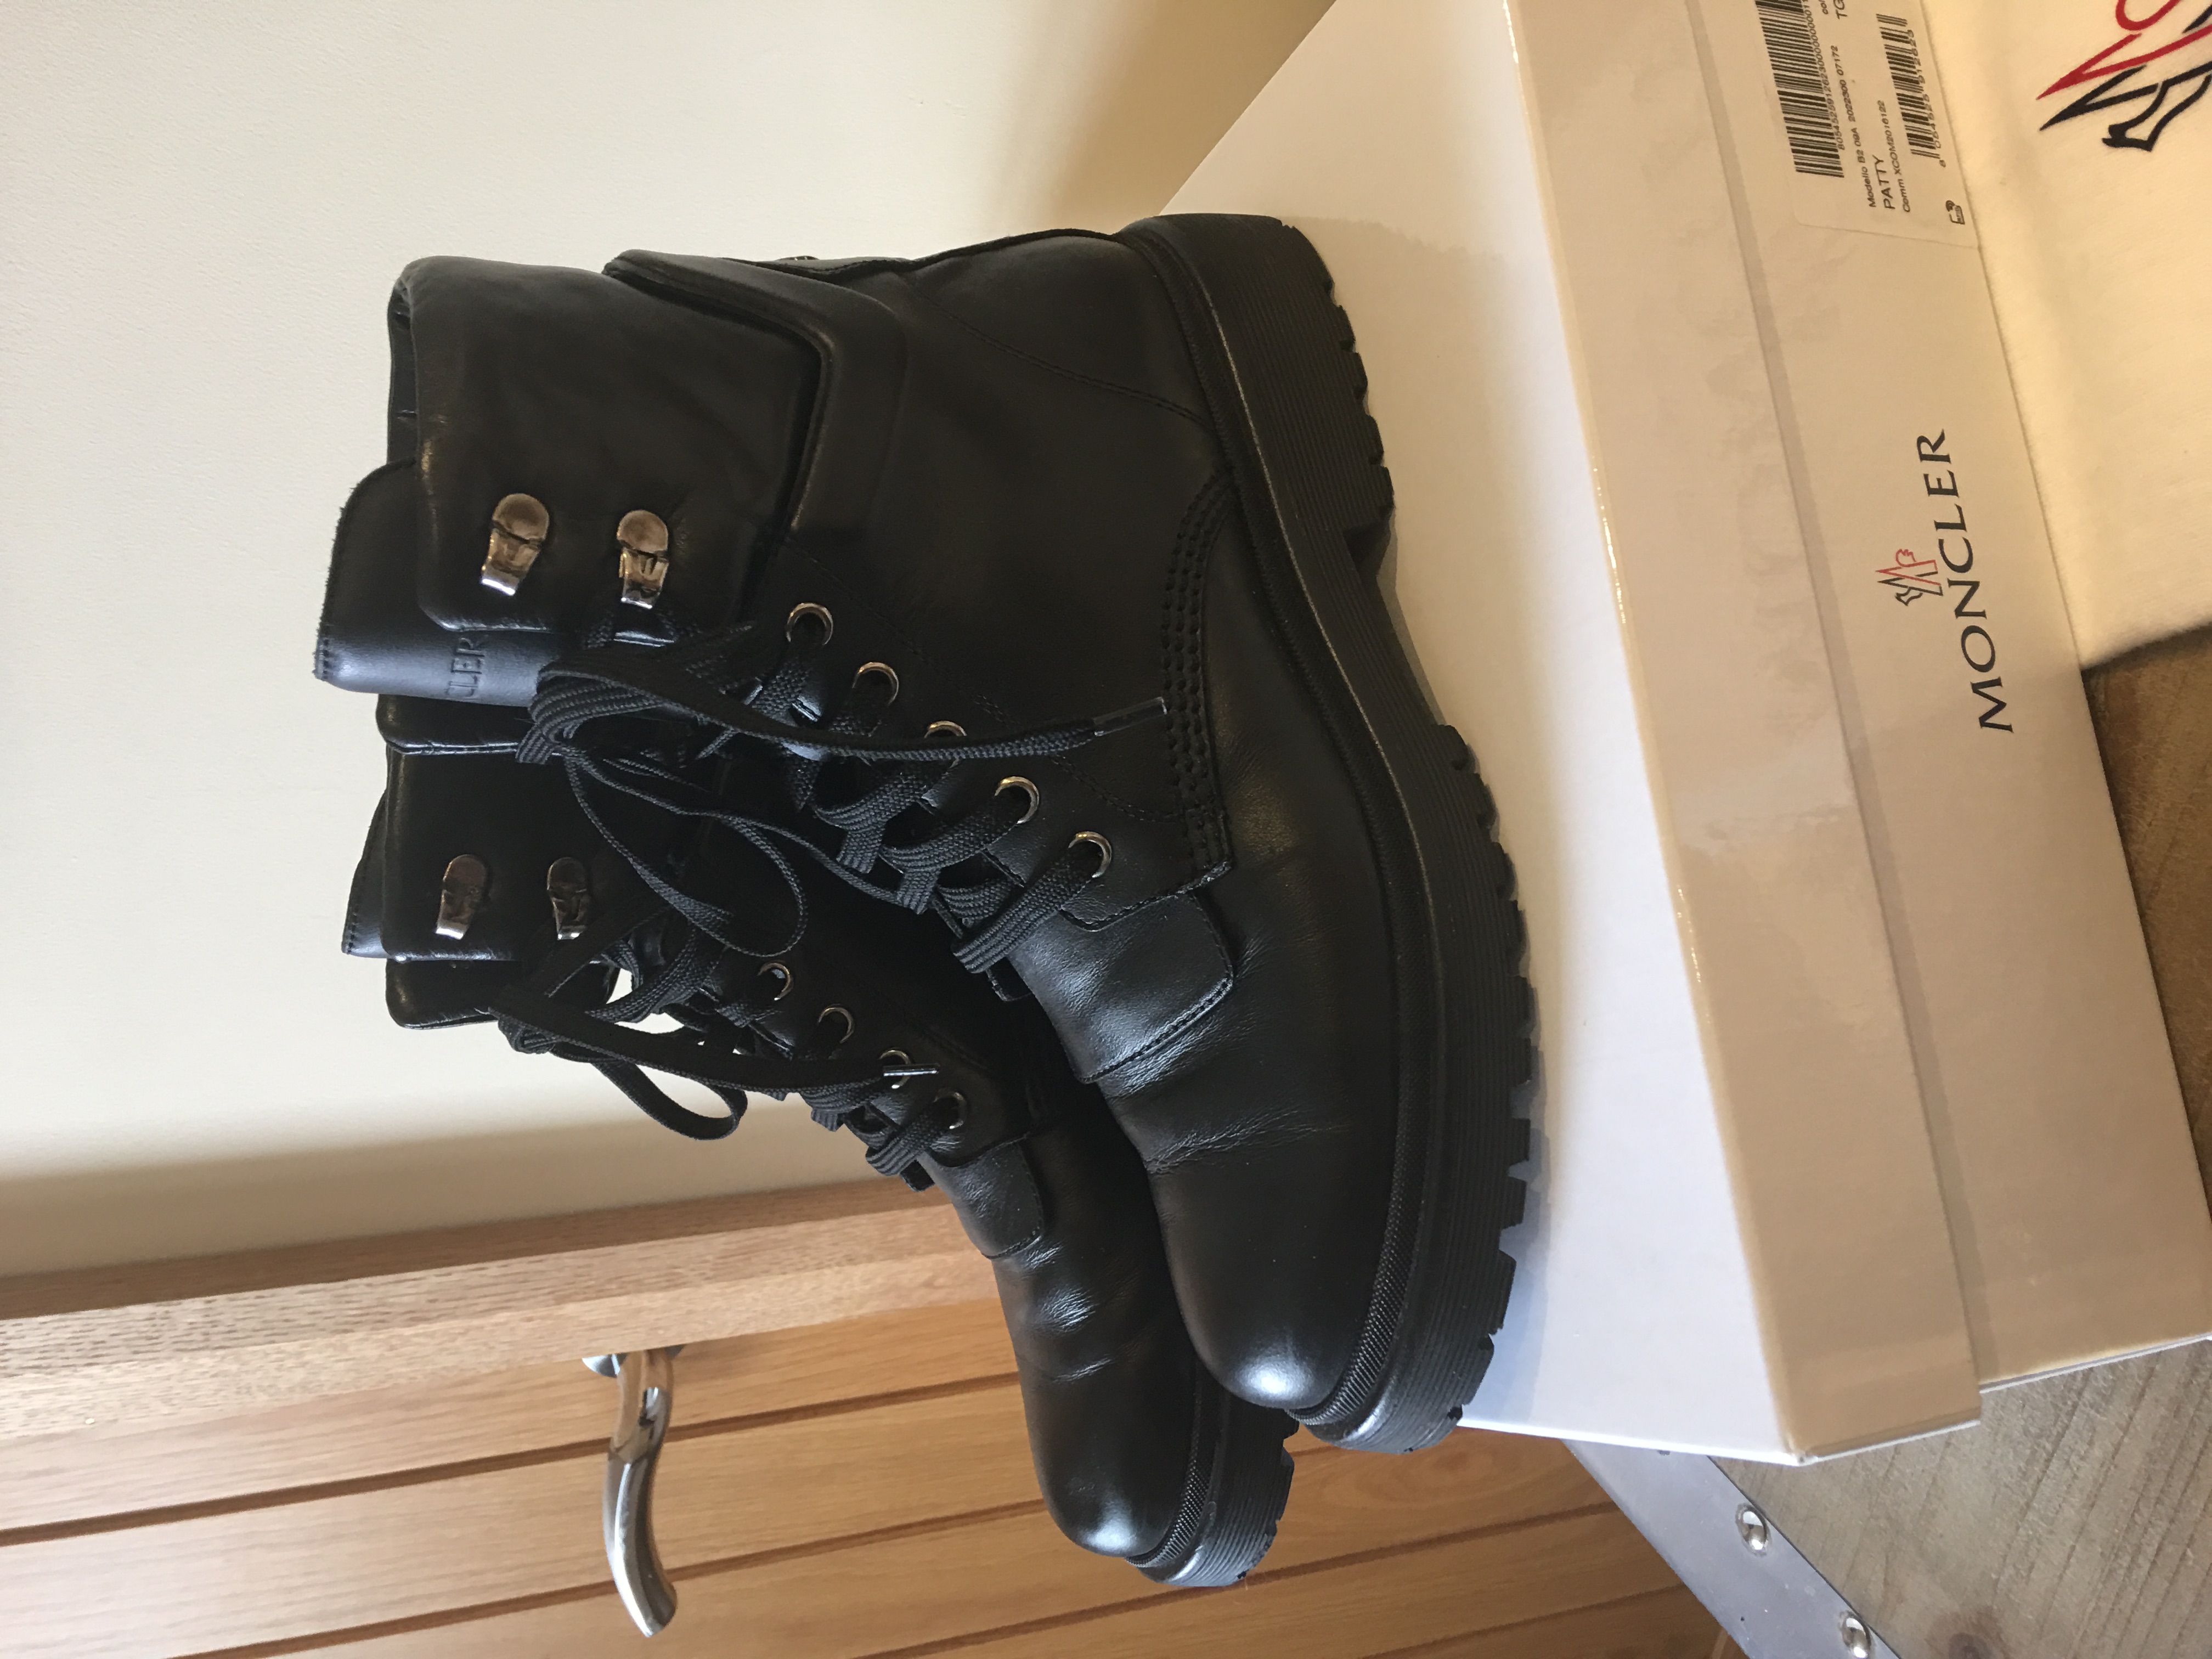 moncler boots patty